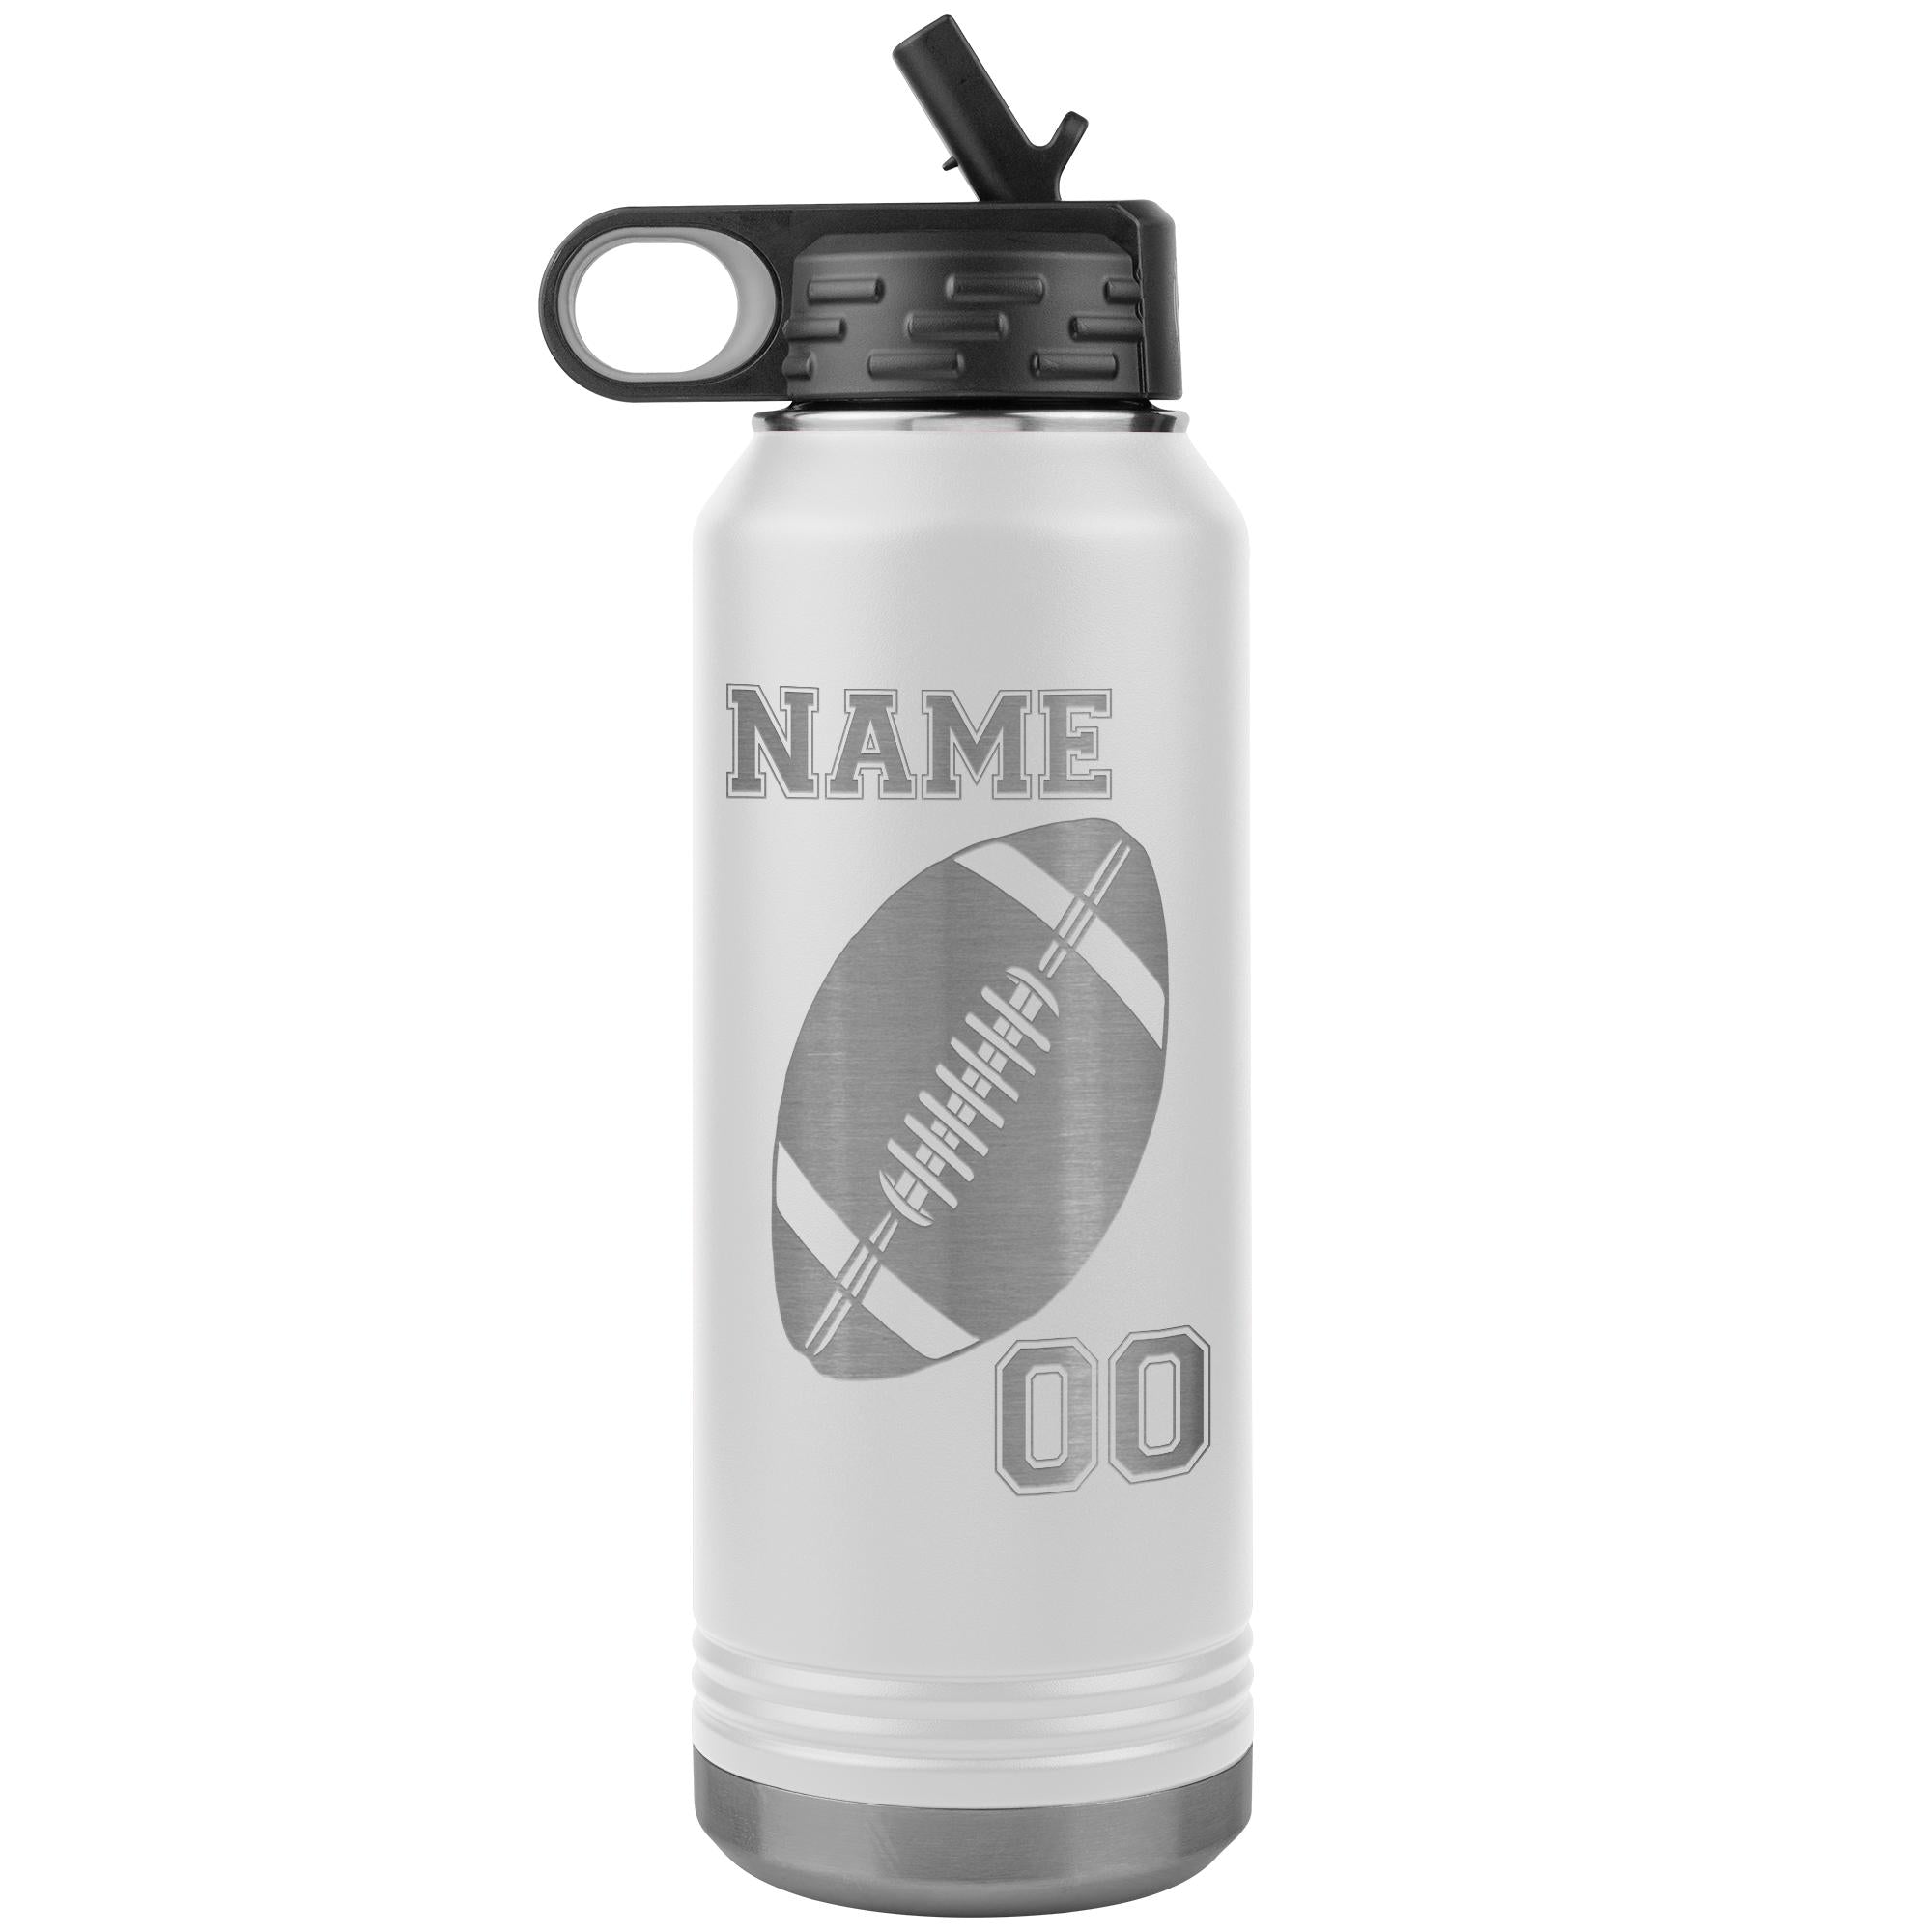 Soccer Personalized Double-Wall Vacuum Insulated 32oz Water Bottle